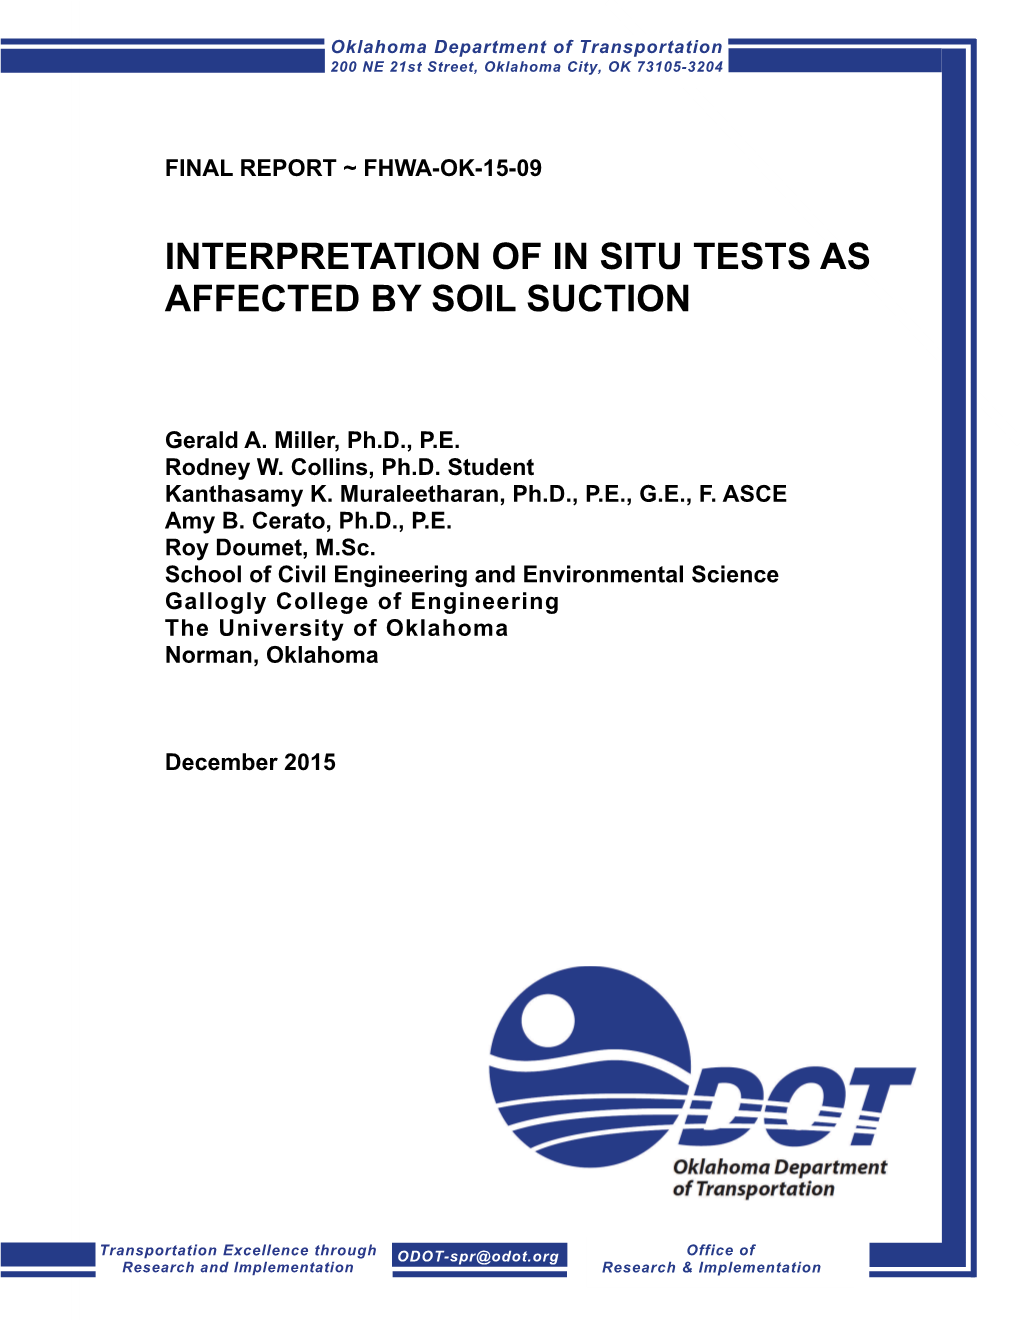 Interpretation of in Situ Tests As Affected by Soil Suction